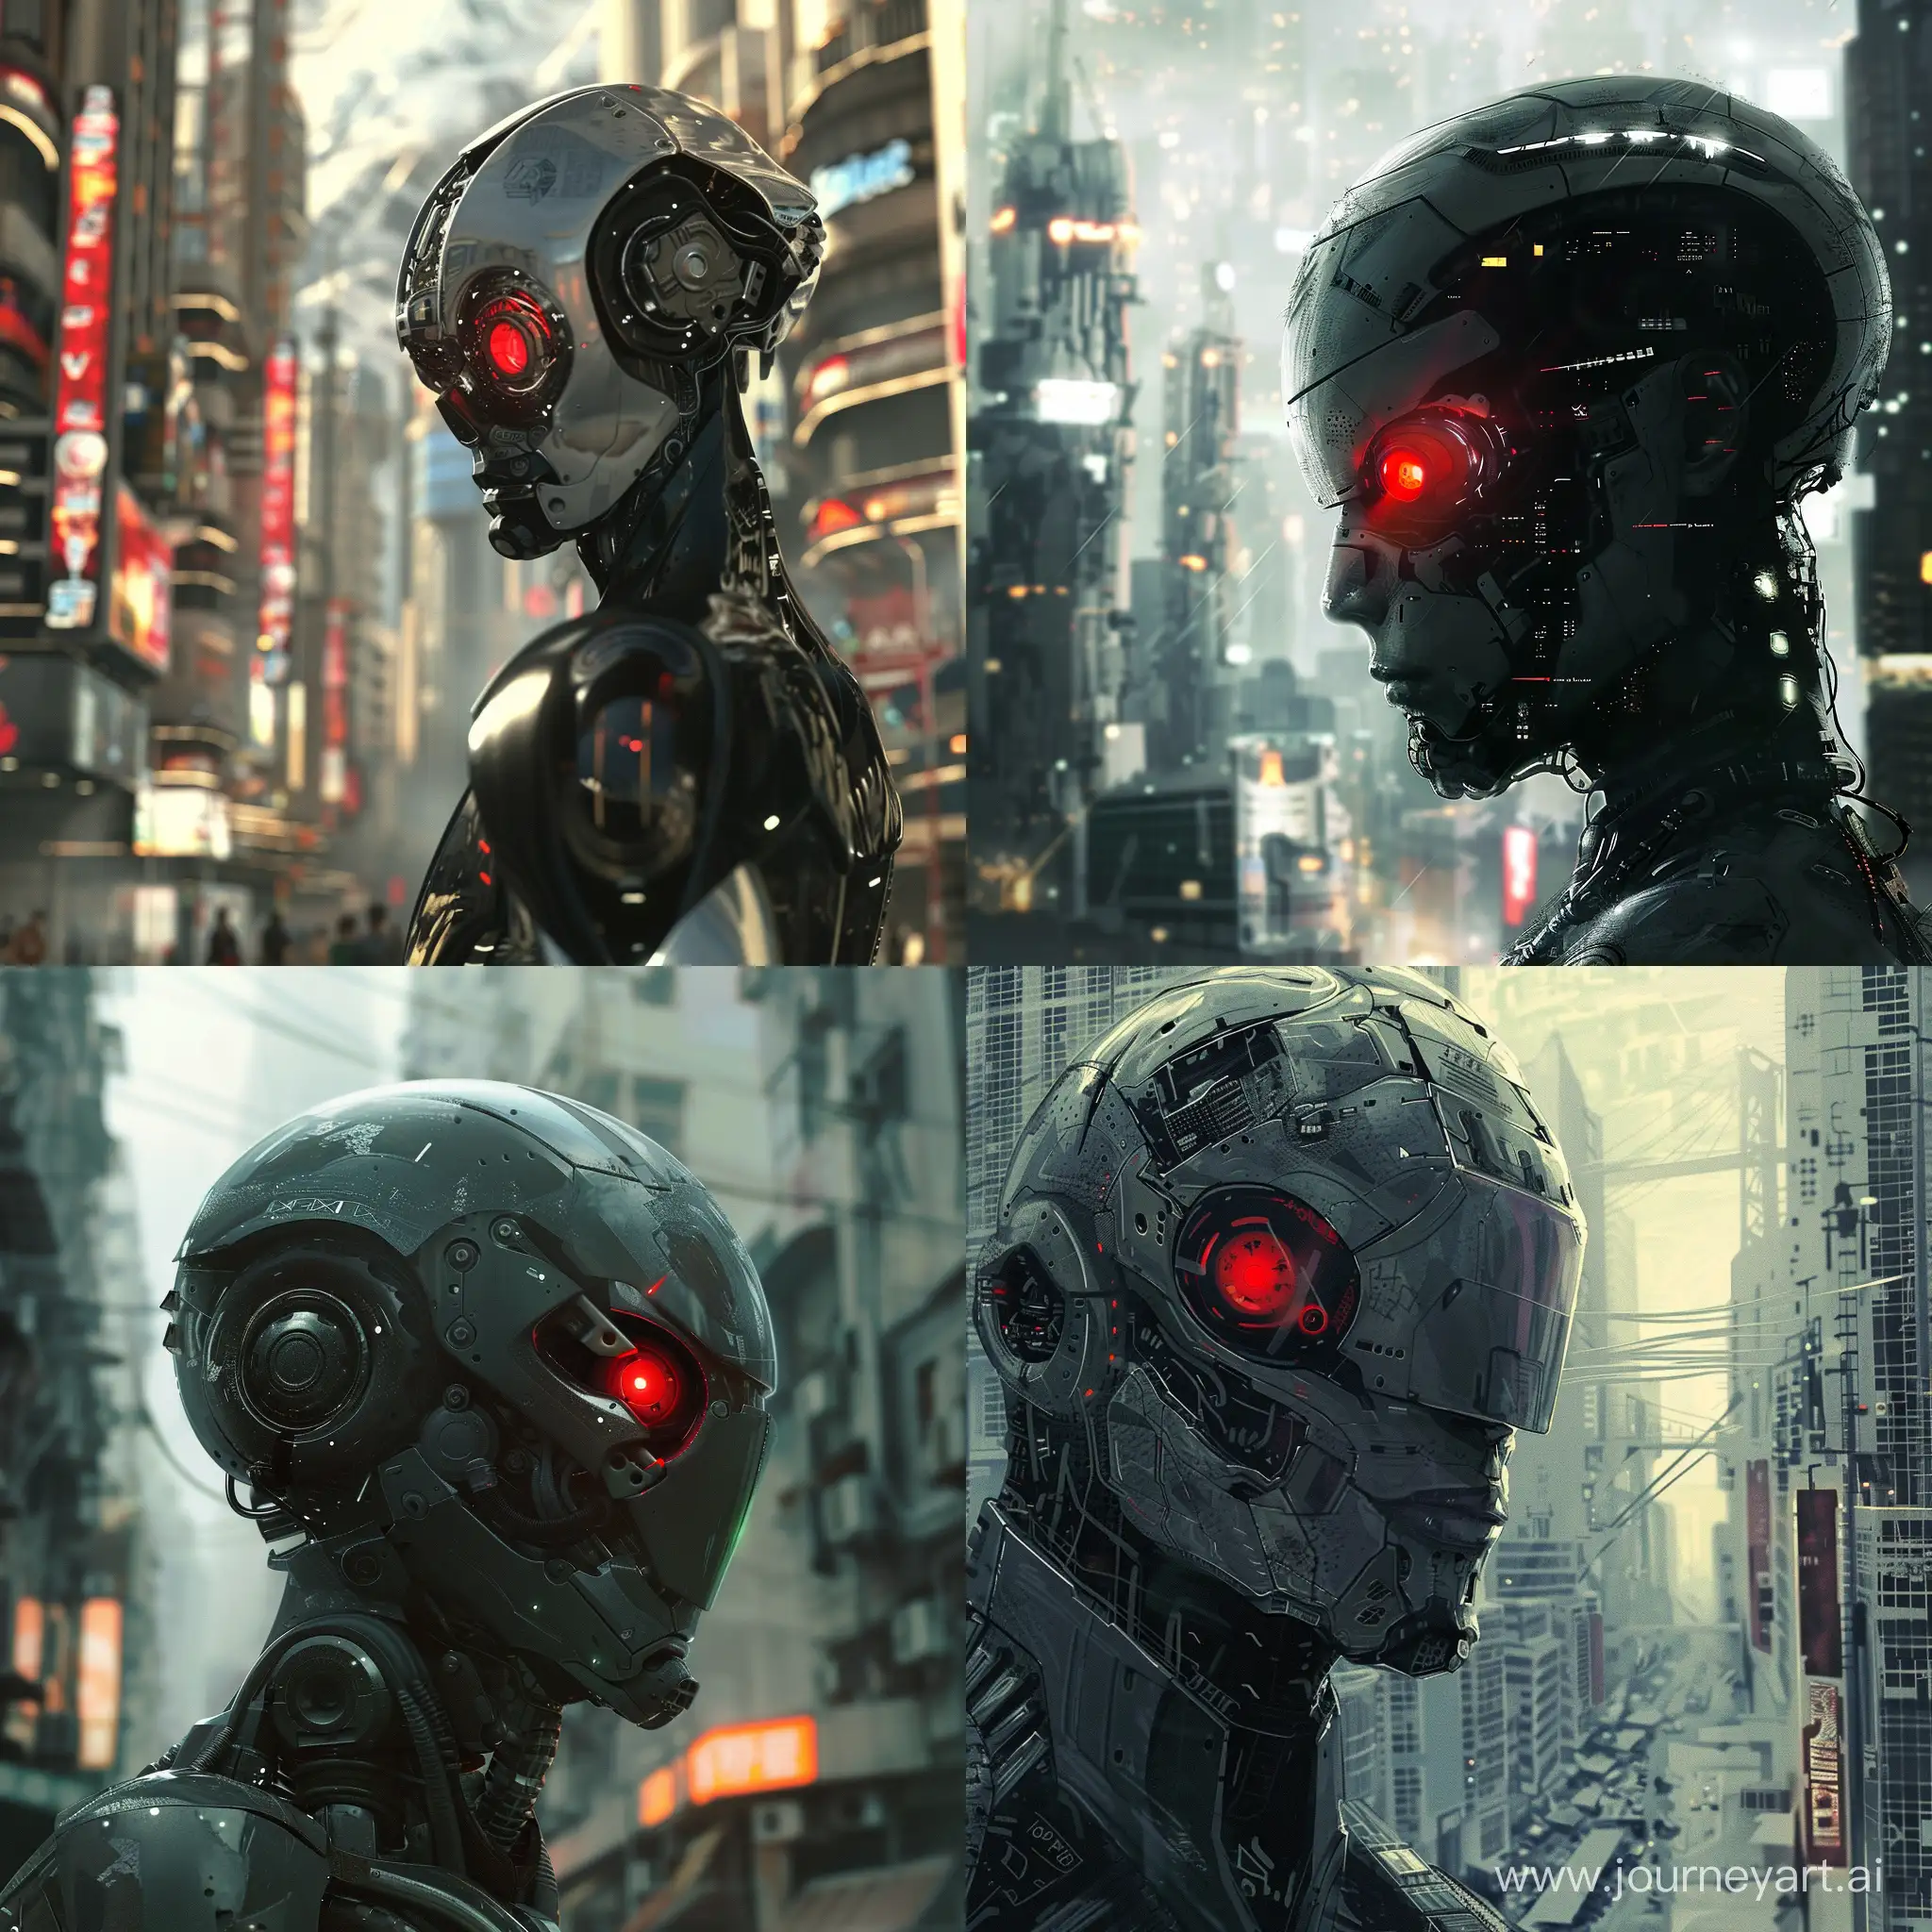 Futuristic-Cityscape-with-RedEyed-Cyborg